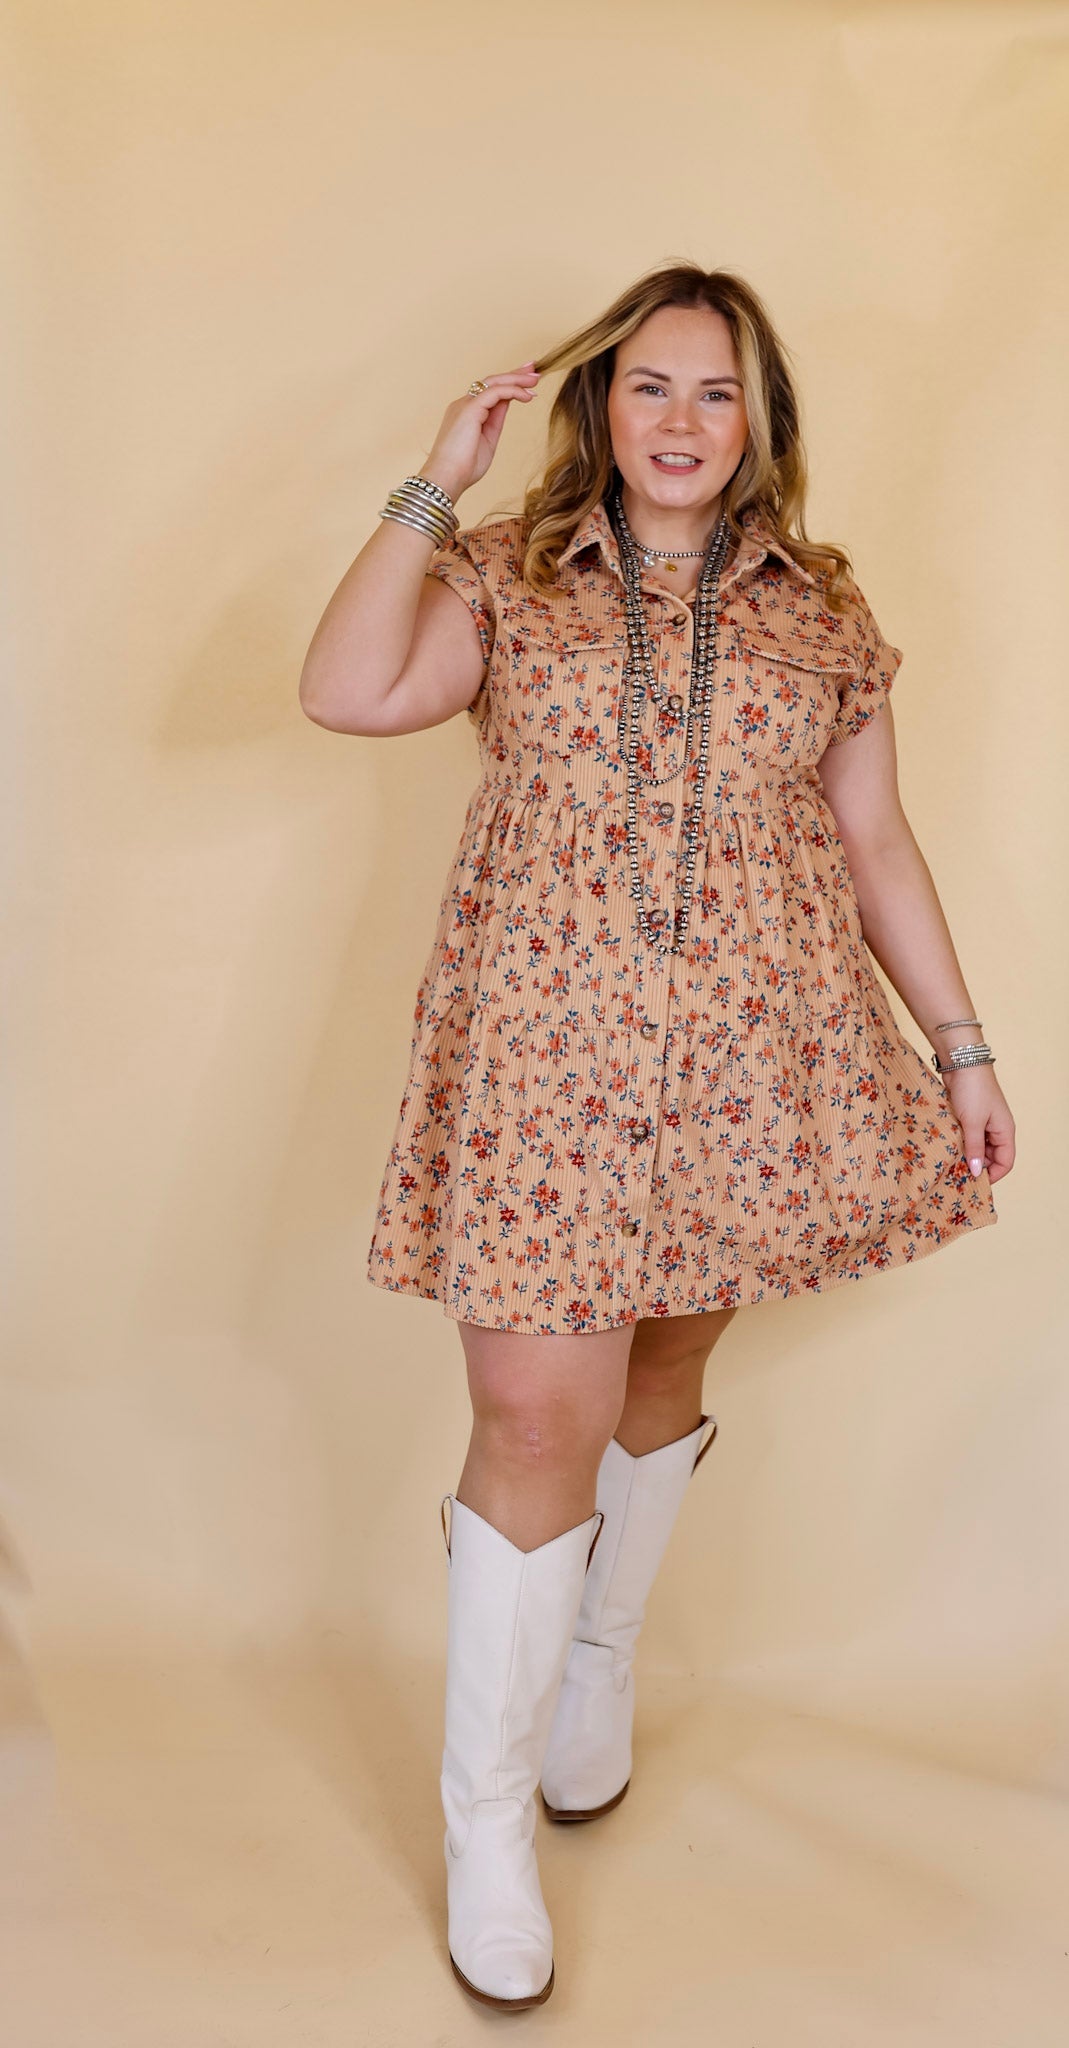 Latest Obsession Button Up Floral Corduroy Dress in Tan - Giddy Up Glamour Boutique